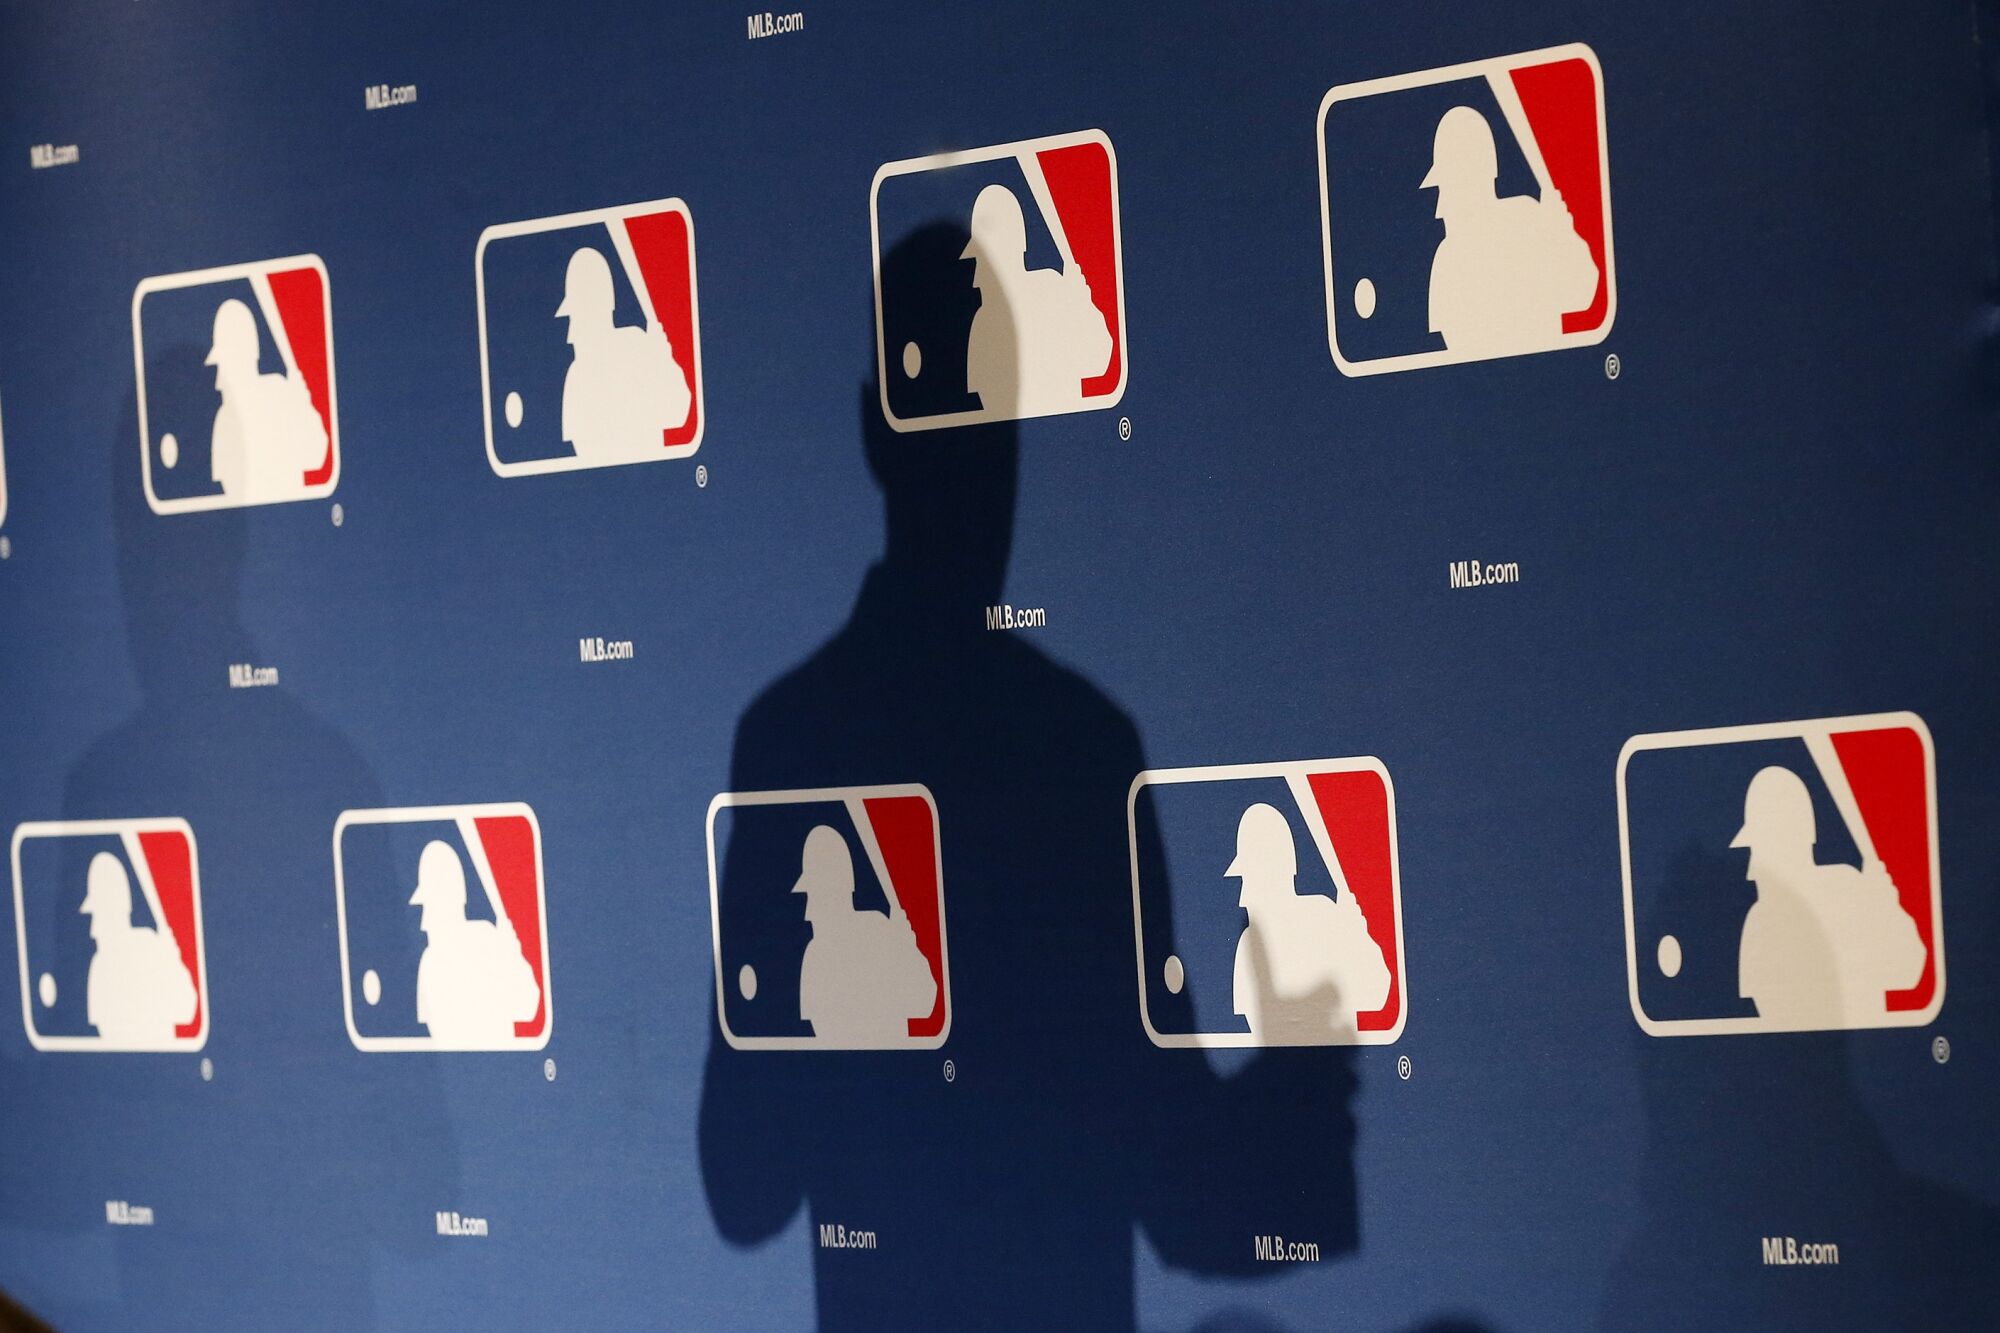 MLB Commissioner Rob Manfred stands in front of a backdrop featuring the league logo